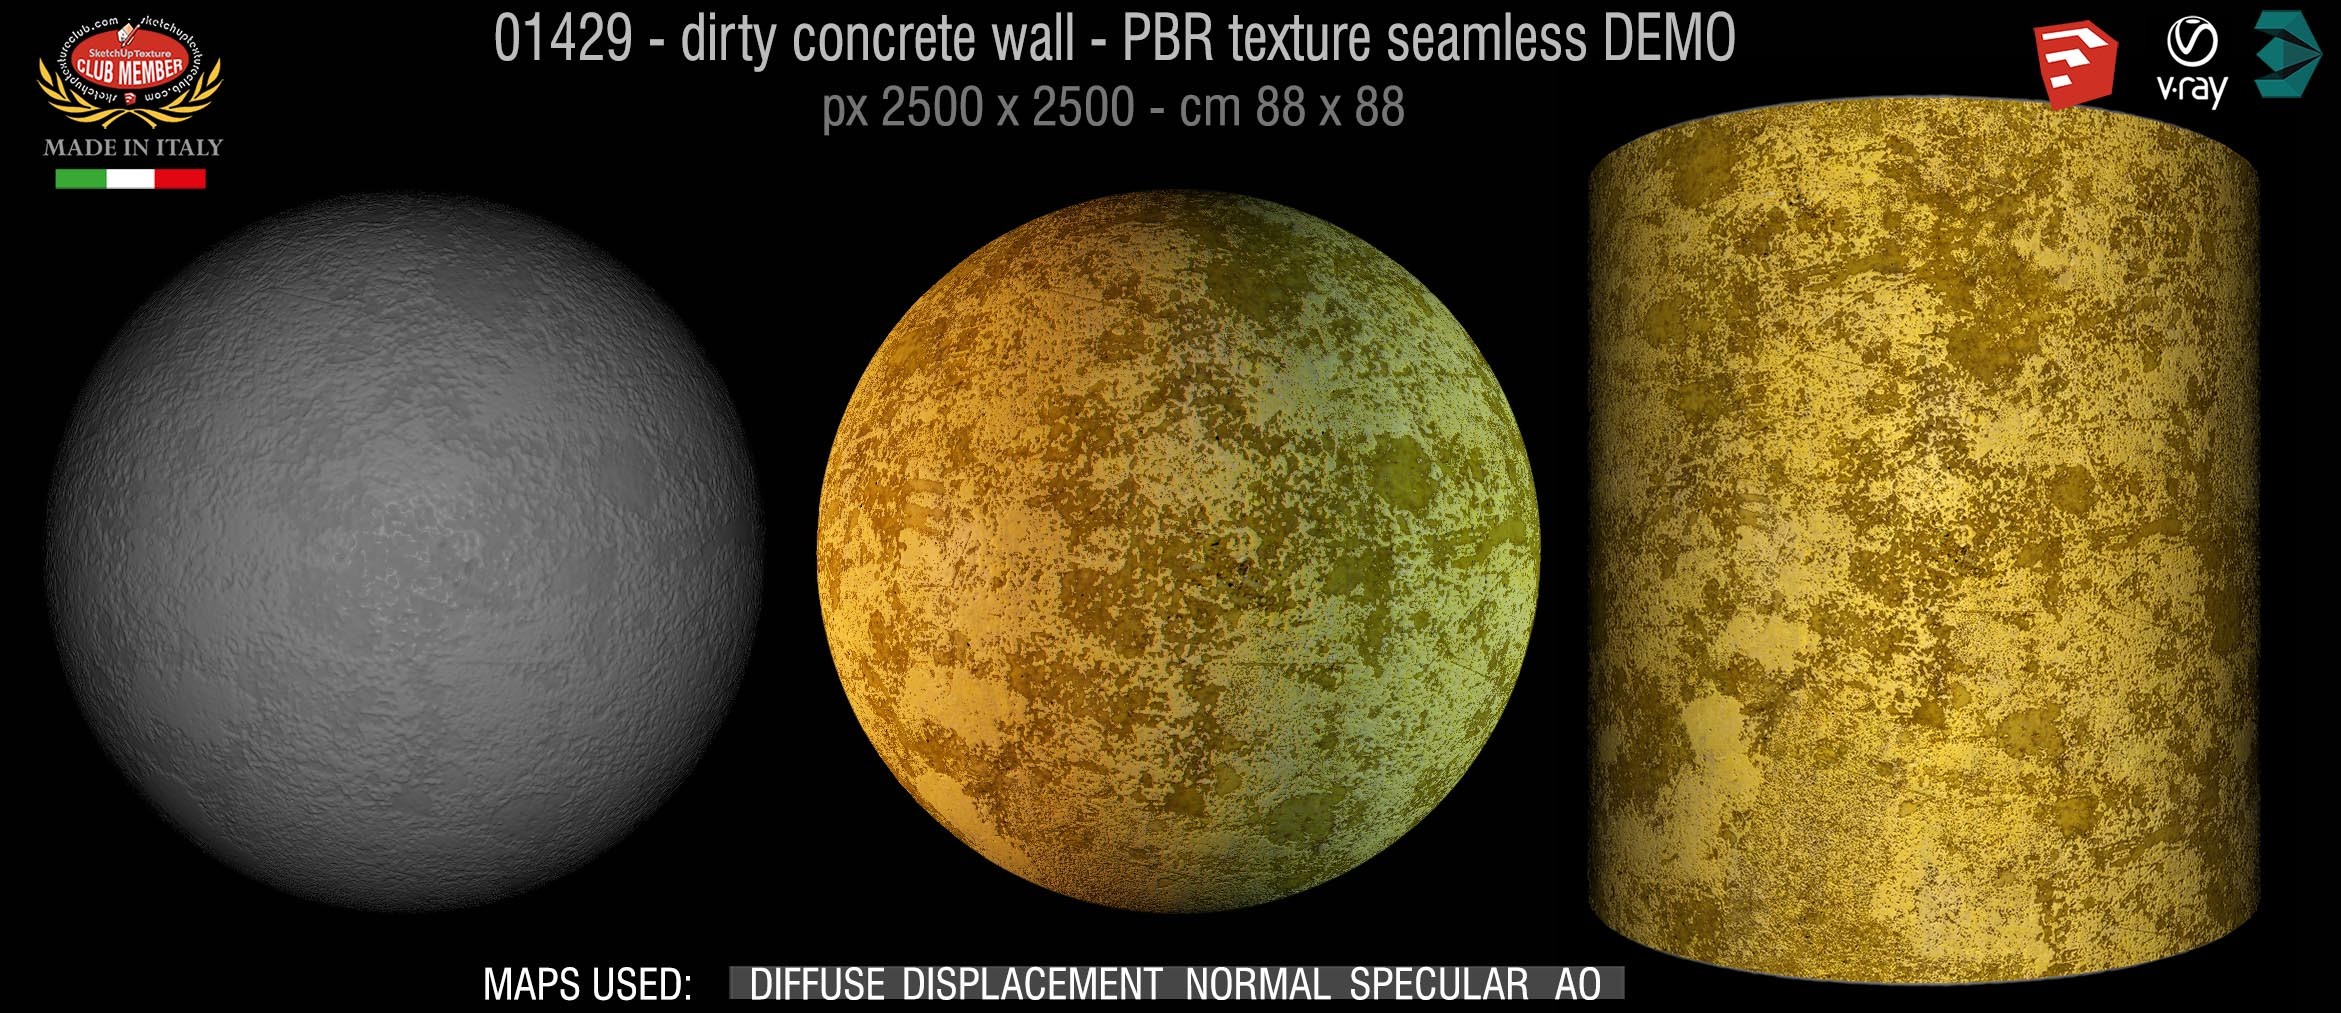 01429  Concrete bare dirty wall PBR texture seamless DEMO